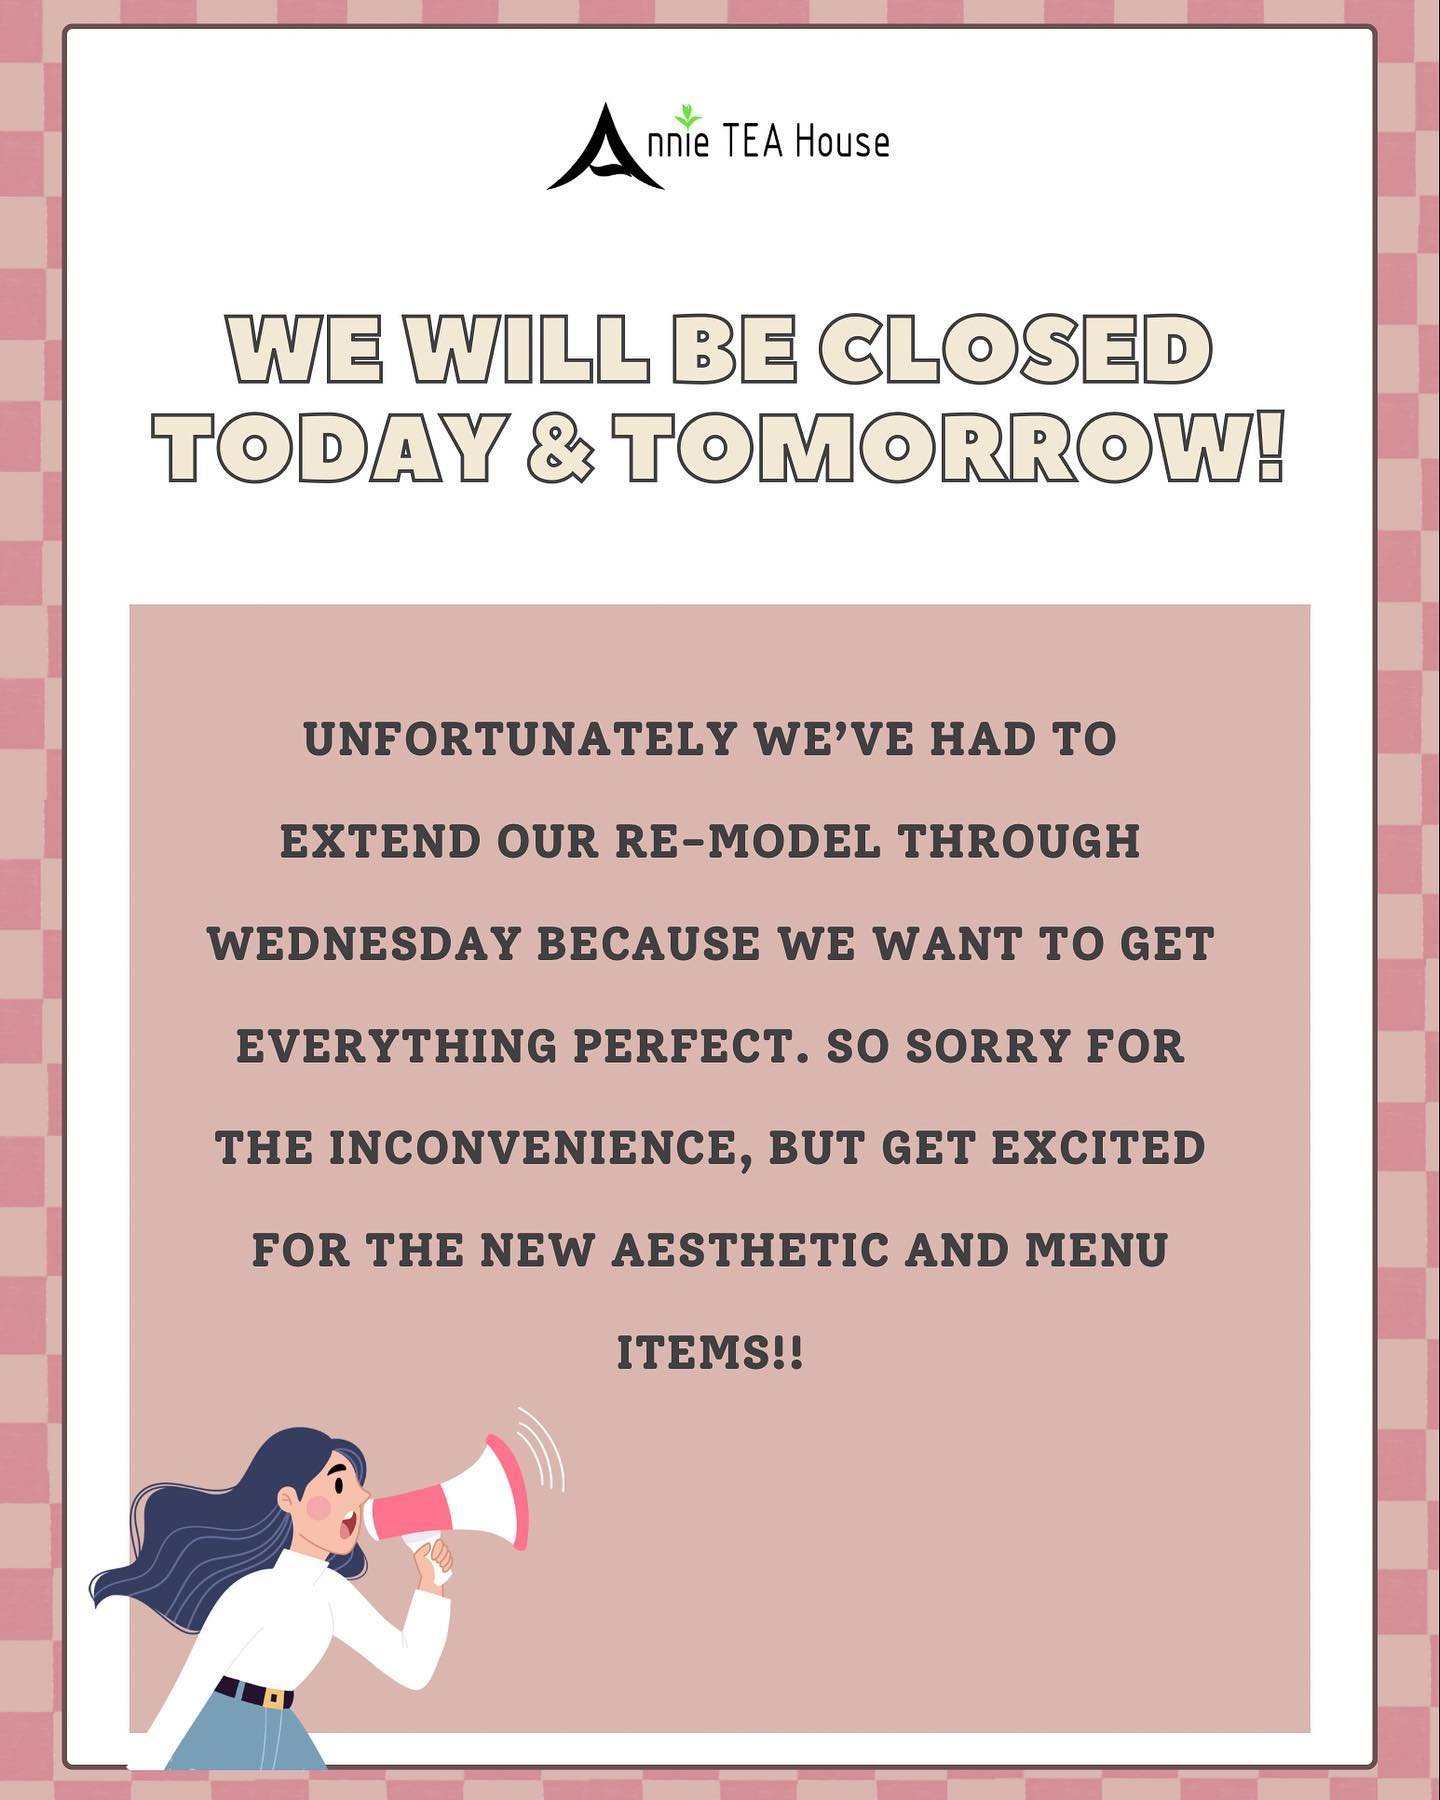 So sorry for the inconvenience but we&rsquo;ll be closed an extra day to make sure everything is just right for you on Thursday, hope to see you then🩷 [swipe for a re-model sneak peek!]